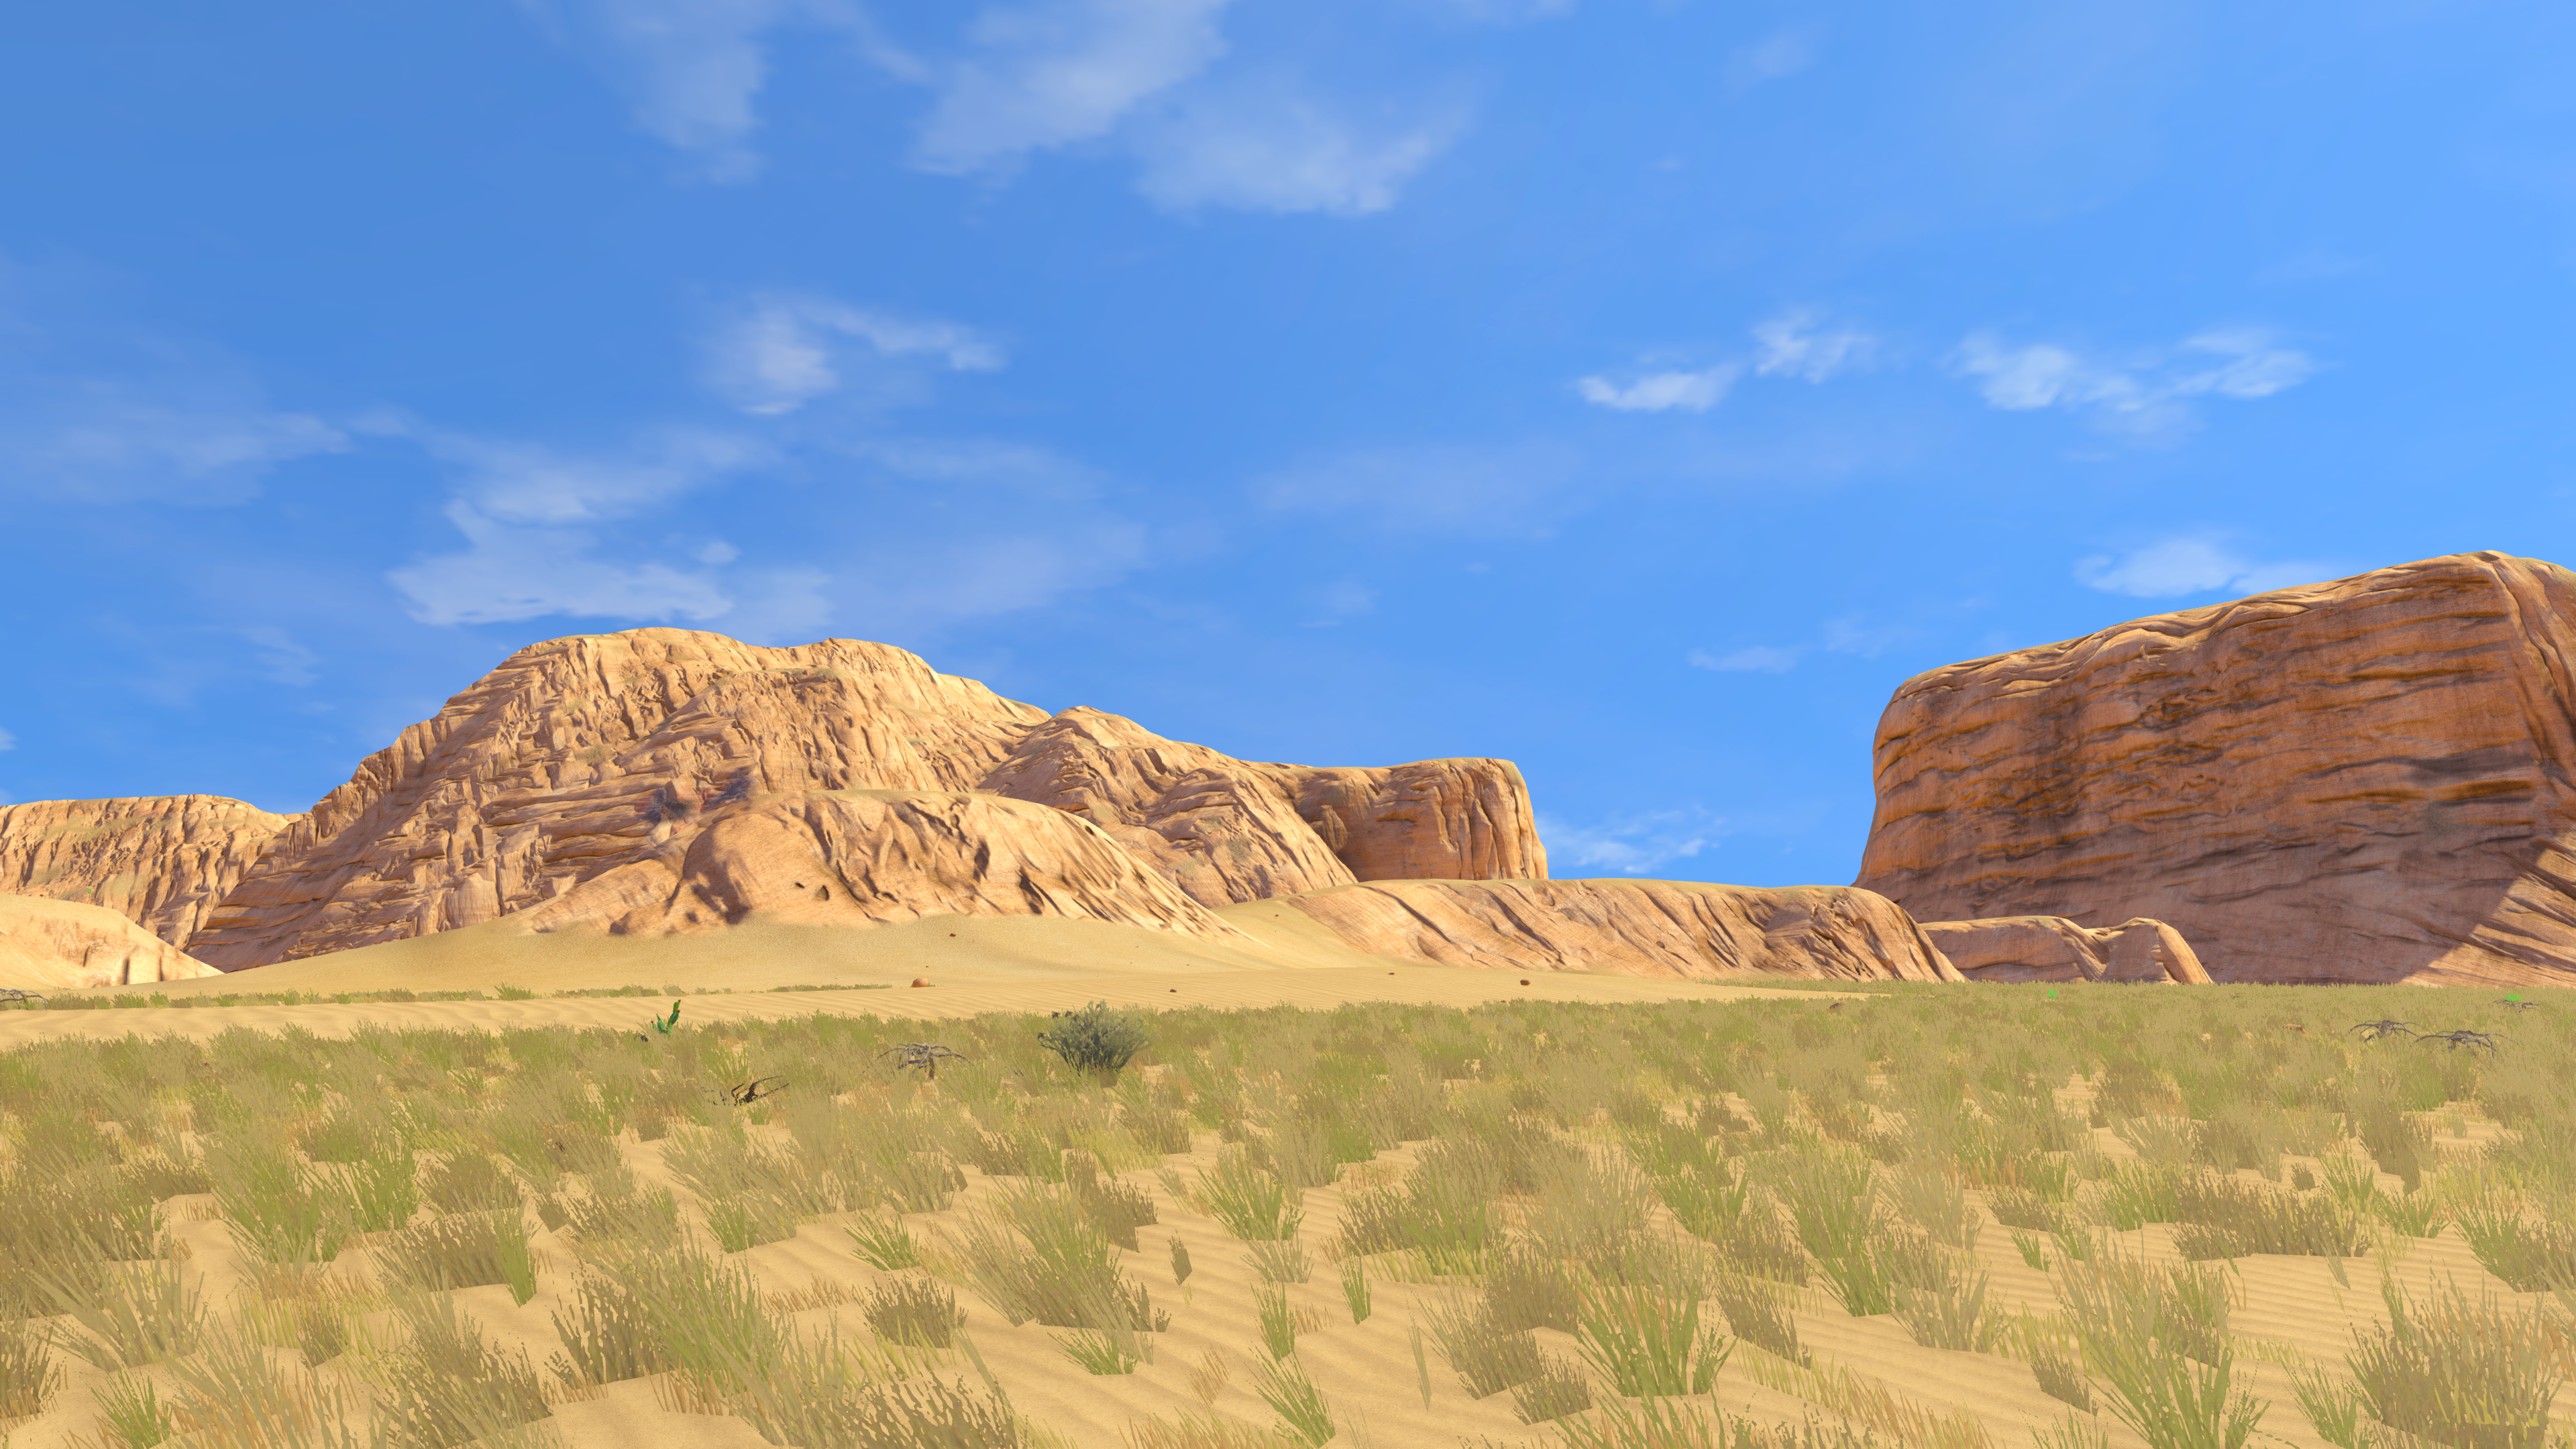 File:RockyDesertBiome.png